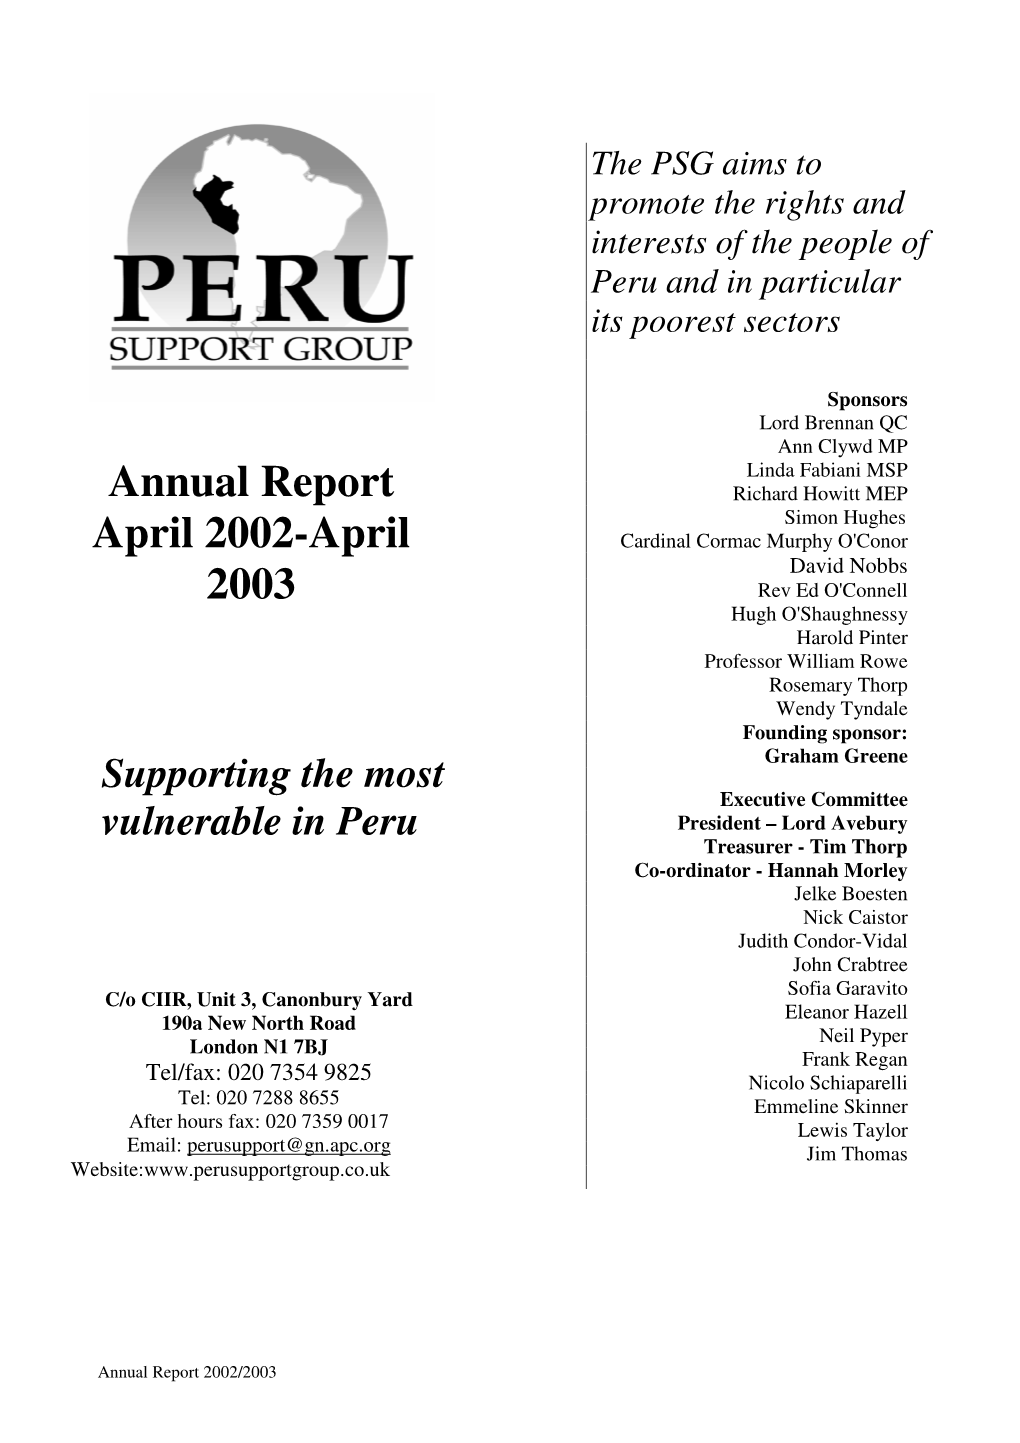 Peru Support Group Annual Report 2002/2003